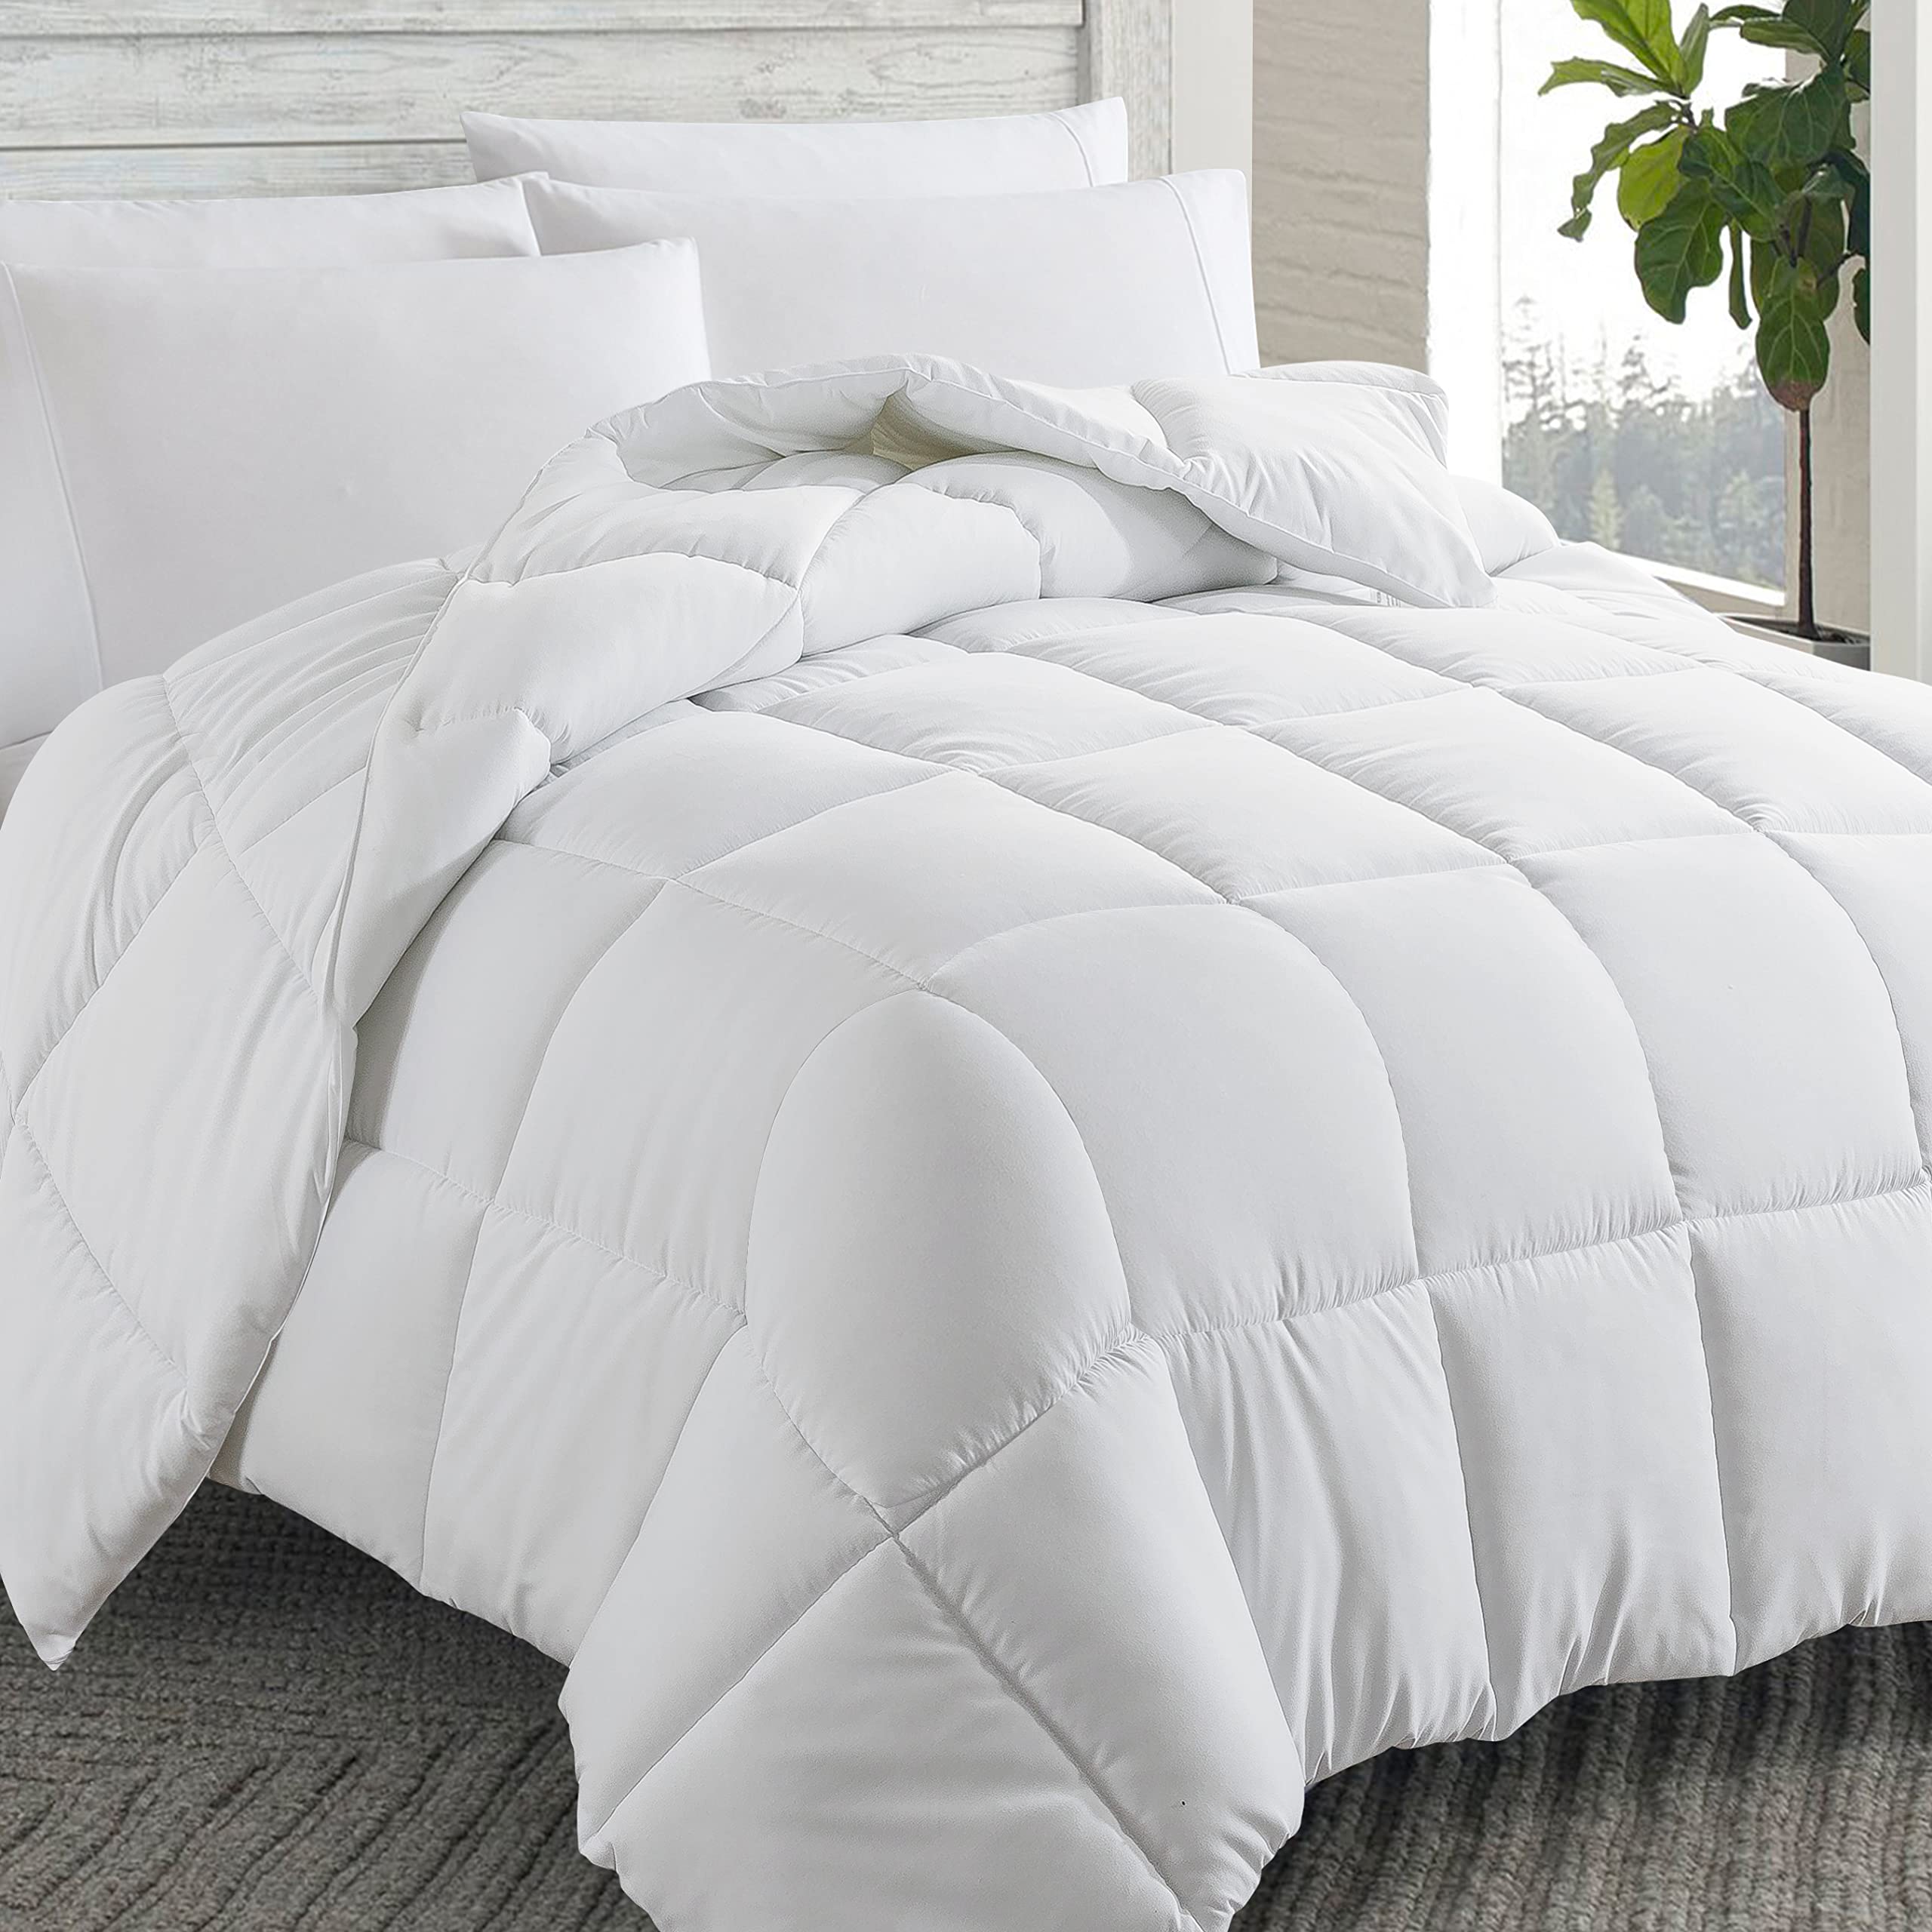 Book Cover Cosybay Down Alternative Comforter (White, Cal-King) - All Season Soft Quilted California King Size Bed Comforter - Reversible Duvet Insert with Corner Tabs - Winter Summer Warm, 104x96 inches California King White